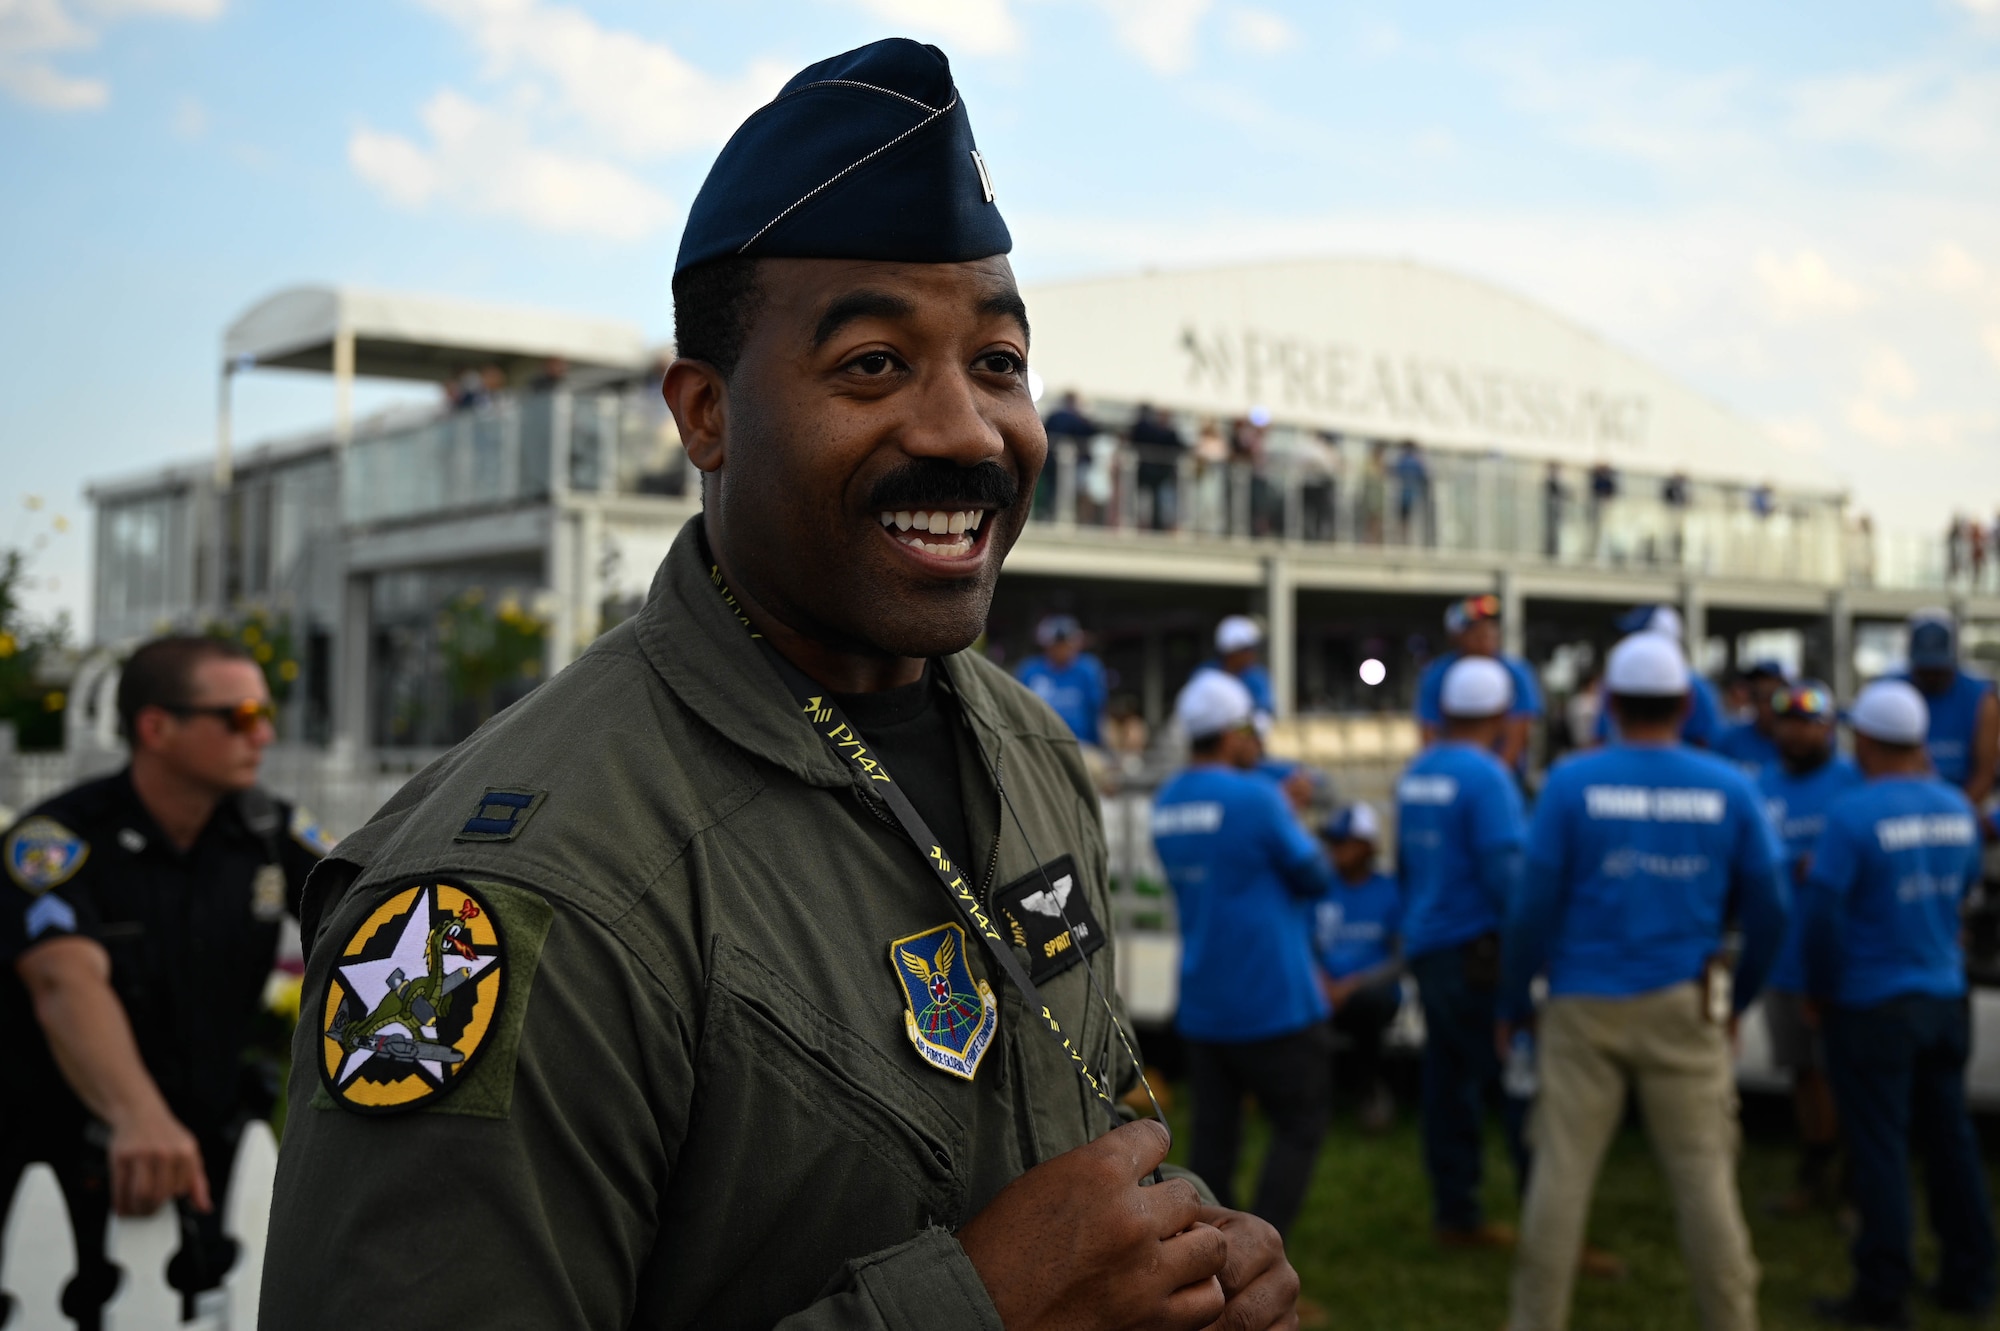 A U.S. Air Force B-2 Spirit pilot meets Preakness Stakes attendees at the Pimlico race course, Baltimore, Maryland, May 21, 2022. The Preakness Stakes is an American thoroughbred horse race held on the third Saturday in May each year in Baltimore, Maryland.